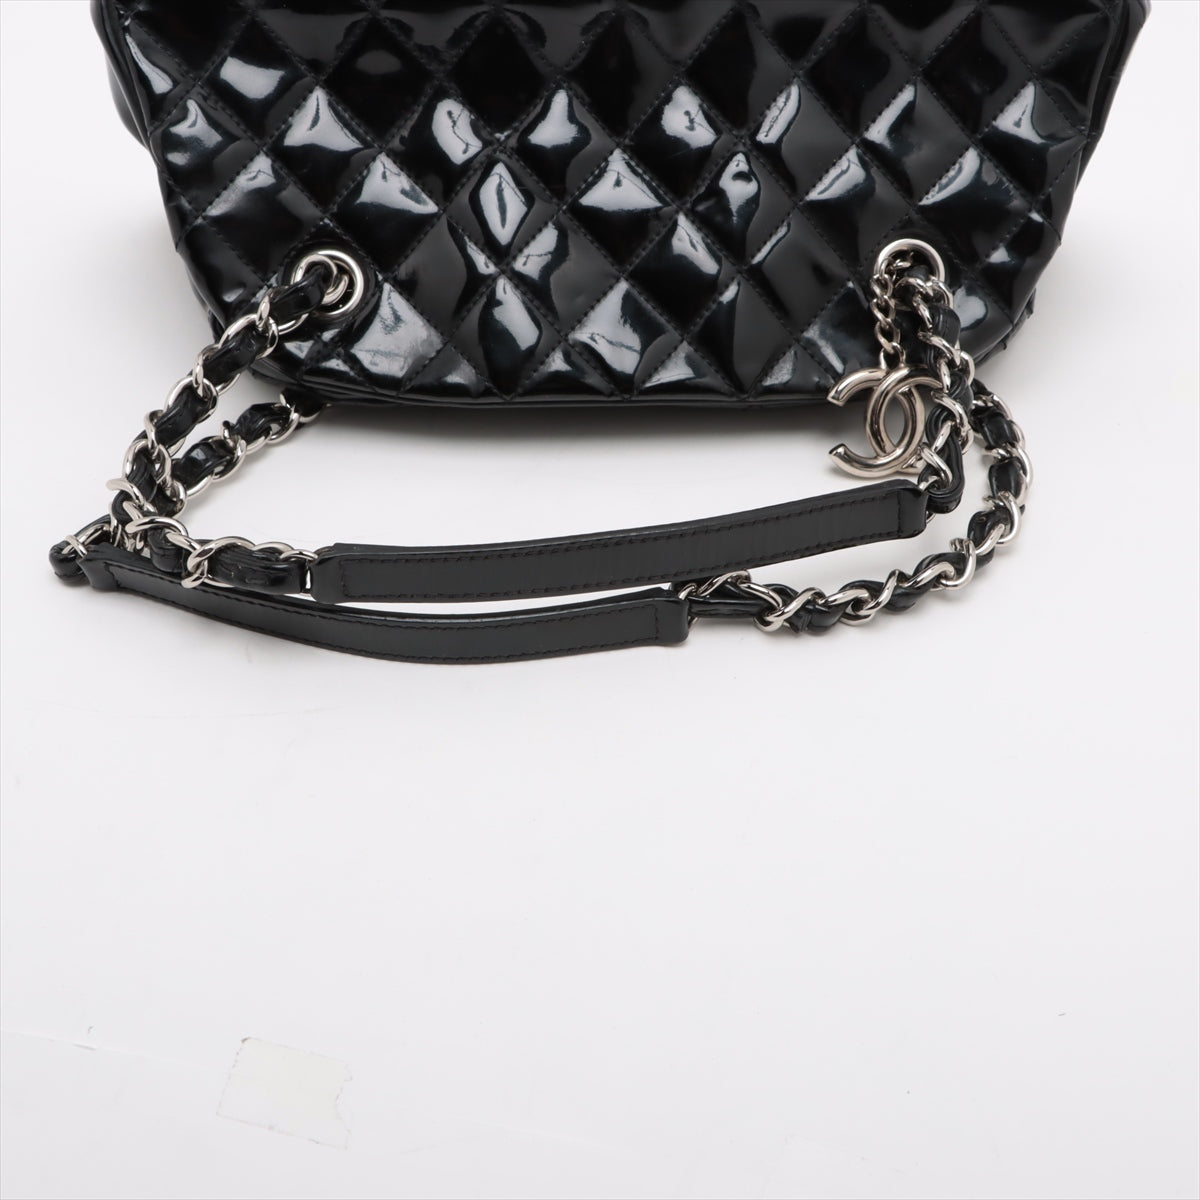 Chanel Mademoiselle Patent leather Chain shoulder bag Black Silver Metal fittings 14XXXXXX